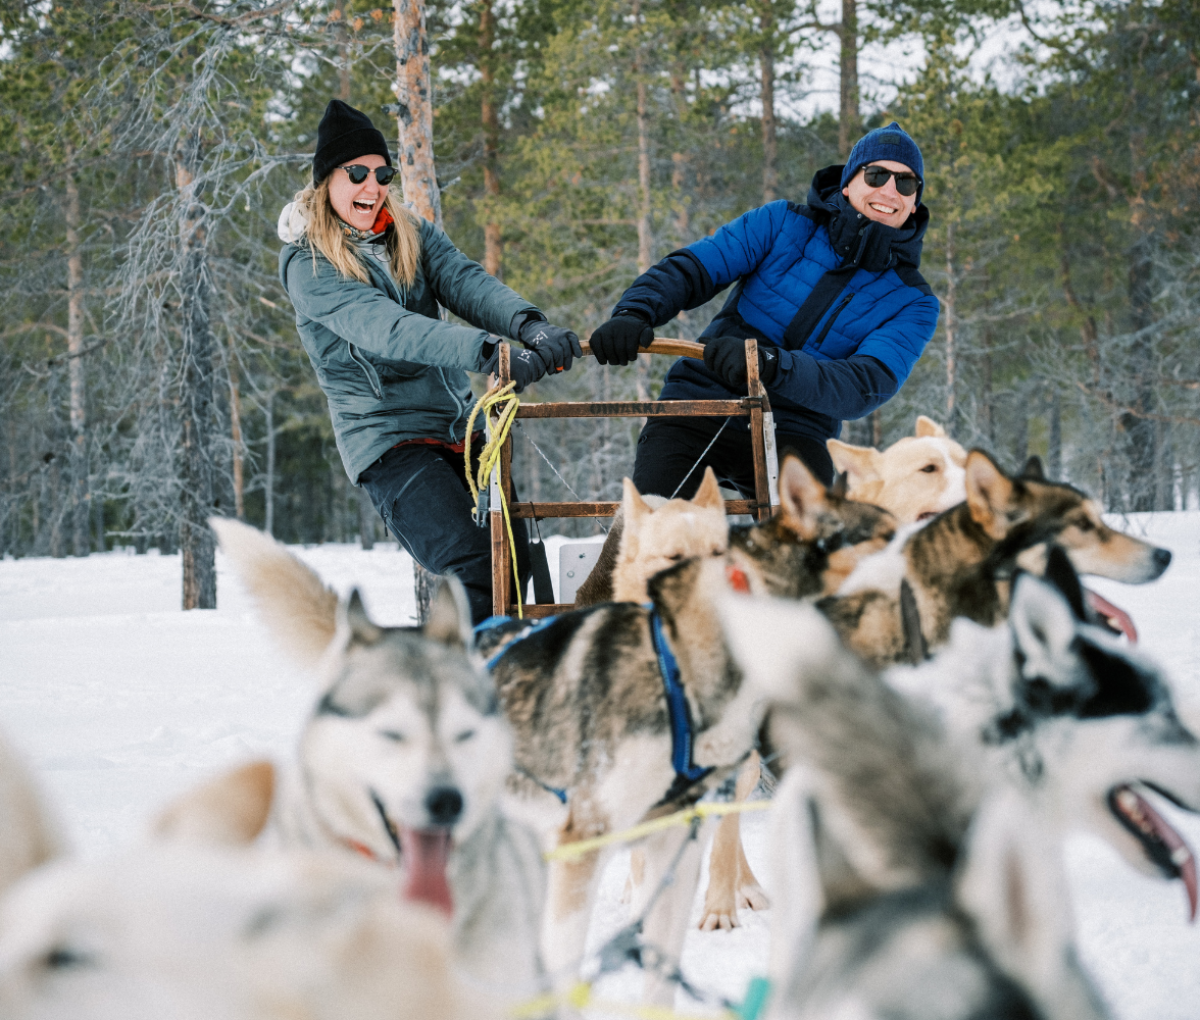 Two people laugh while riding on a dogsled, being led by a pack of dogs on a snowy day in Jämtland Härjedalen